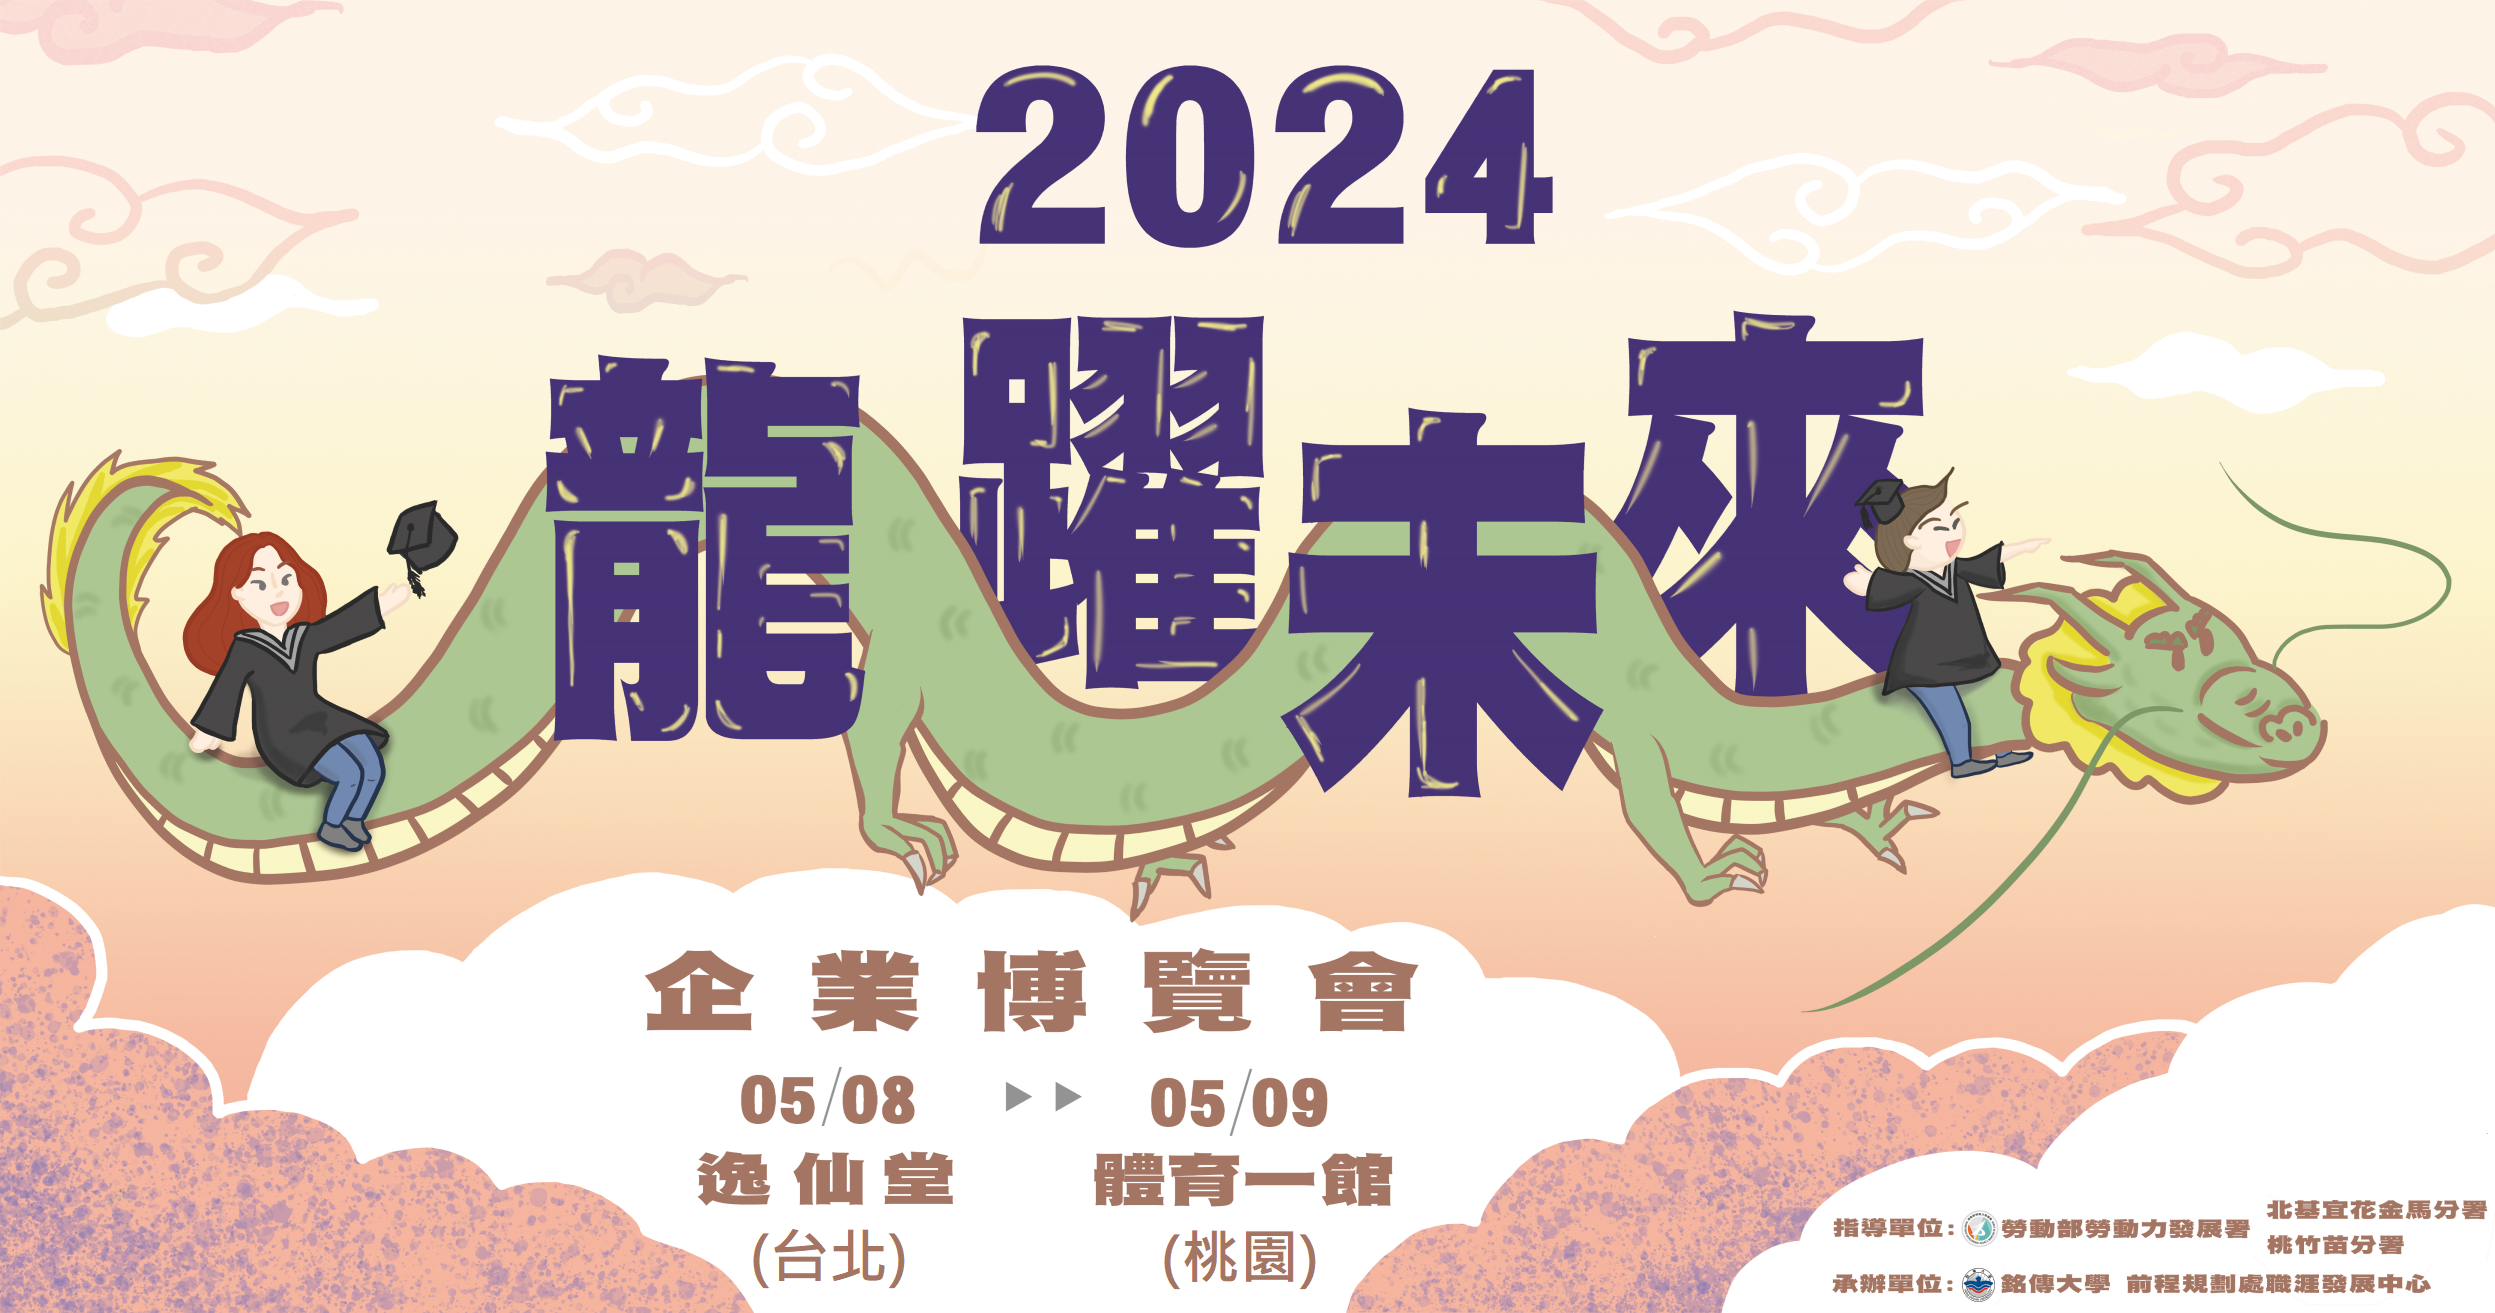 Featured image for “Ming Chuan University Enterprise Expo 2024”